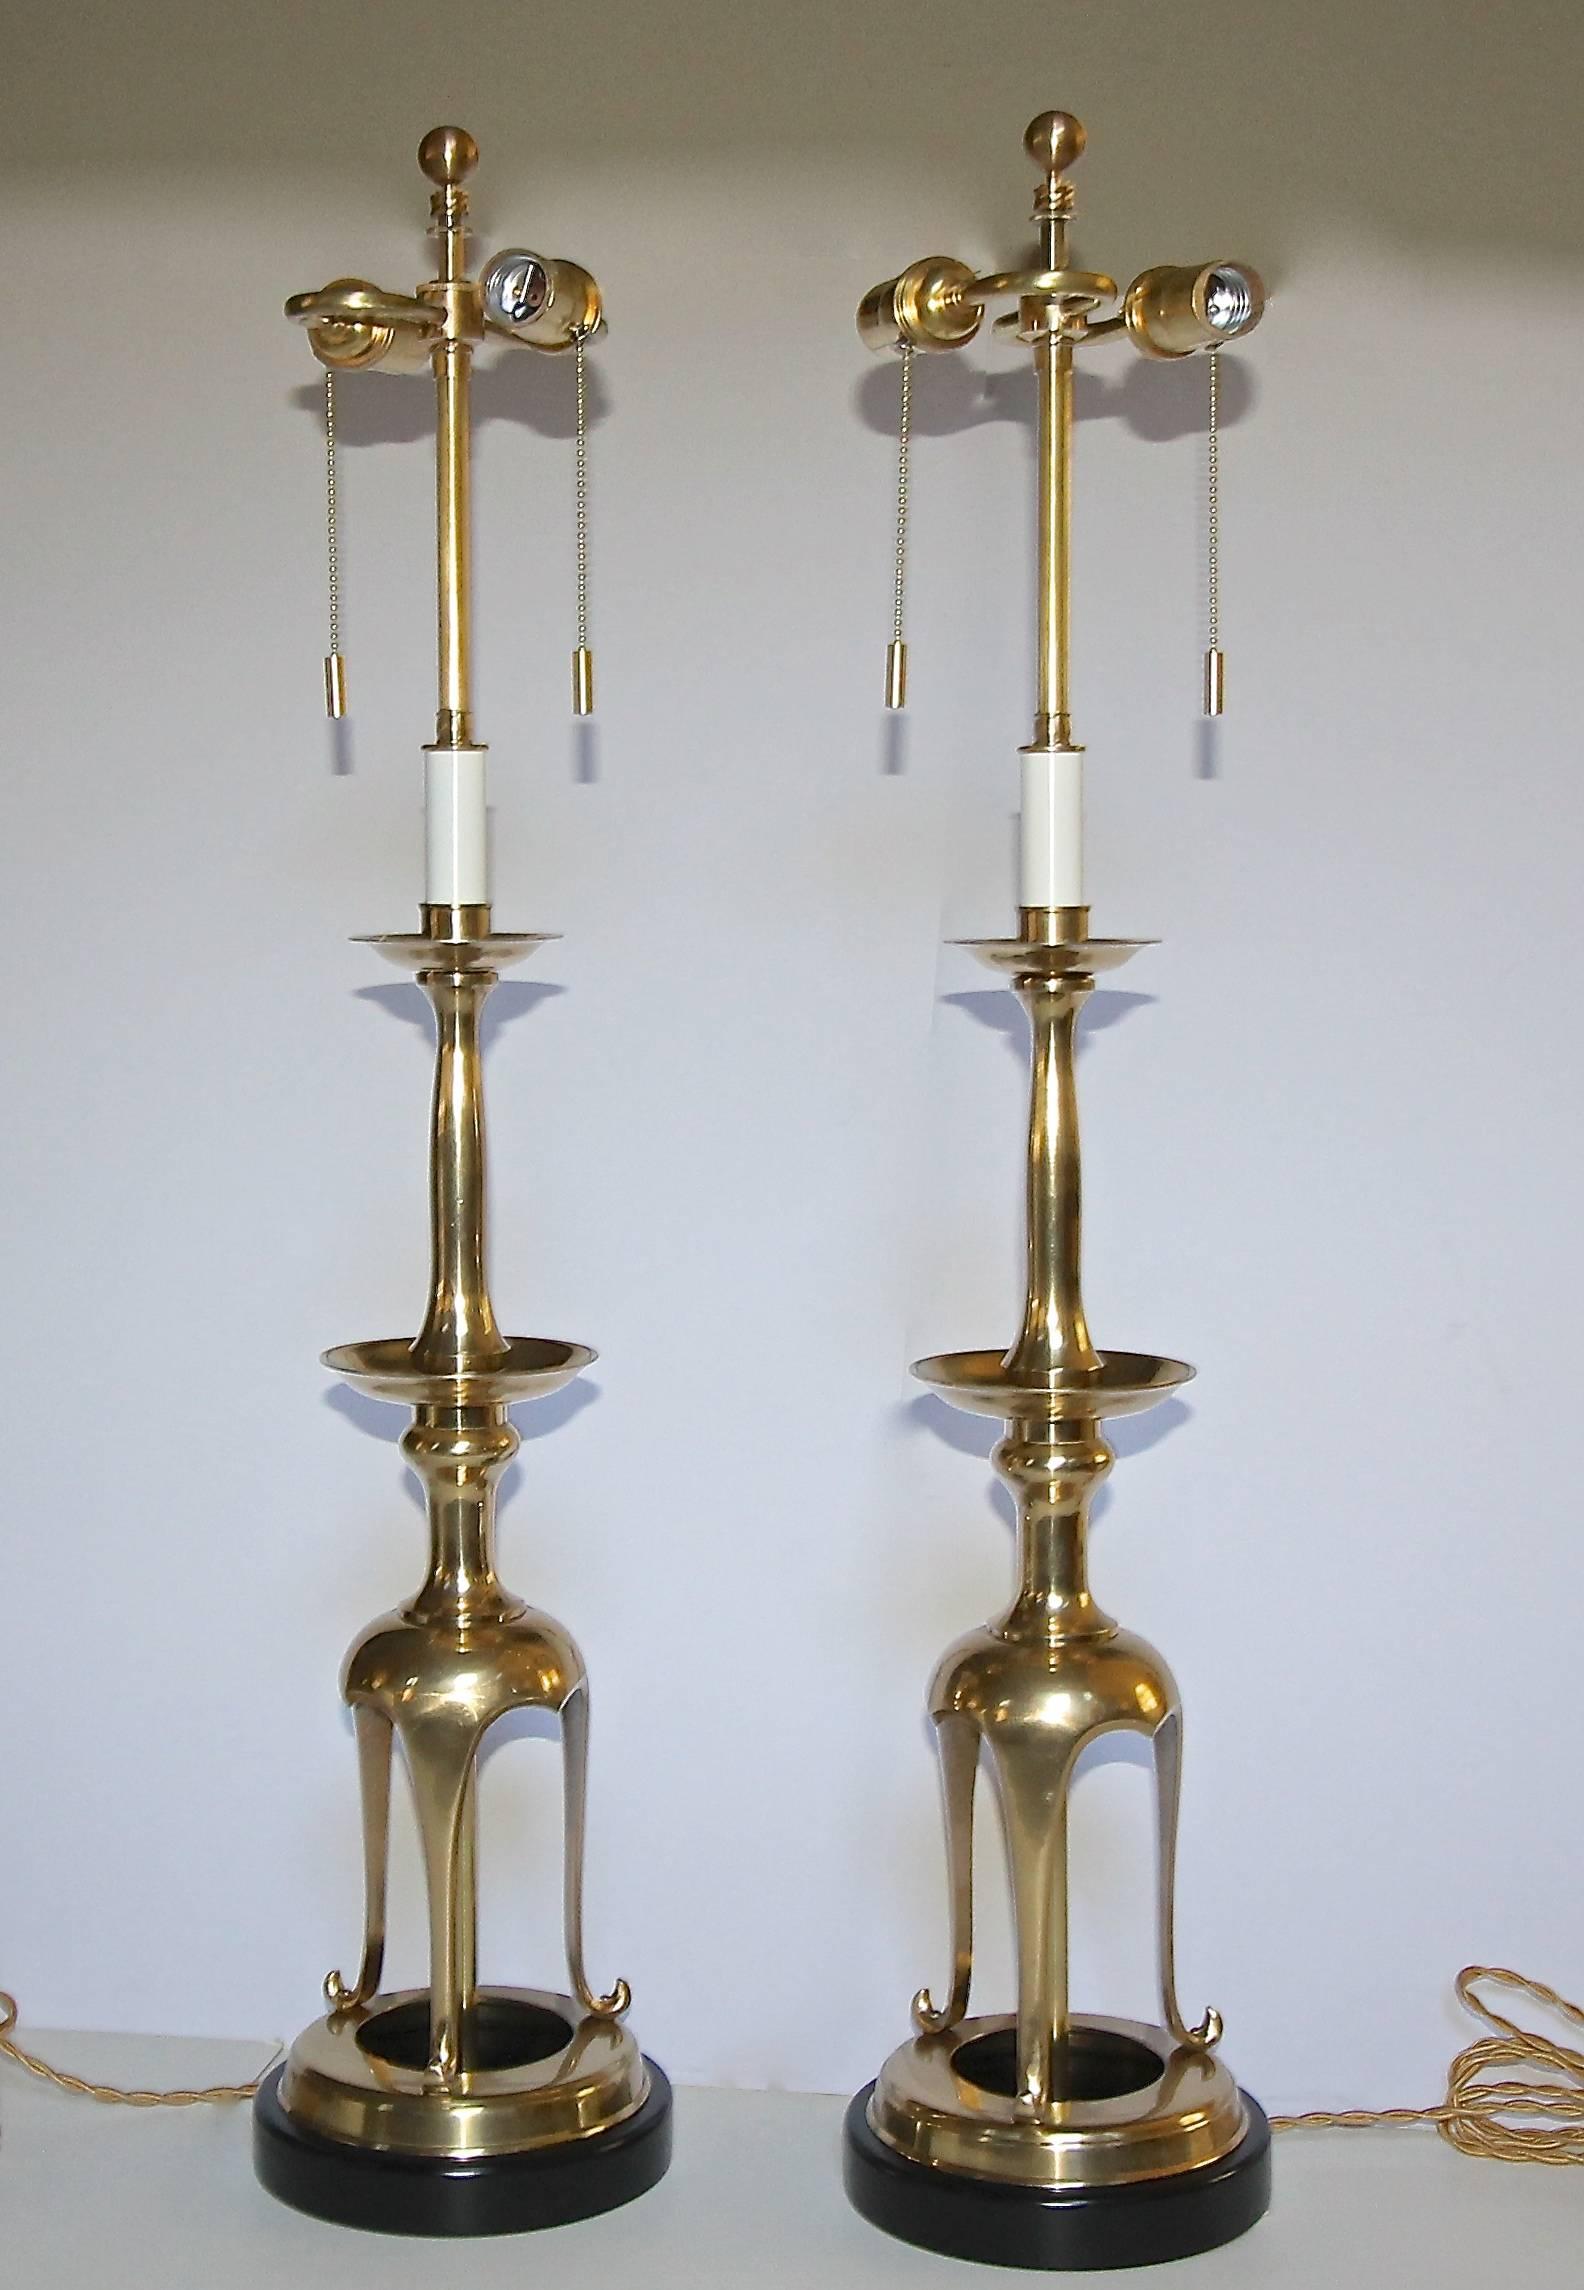 Pair of Tall Brass Japanese Asian Candlestick Table Lamps 1